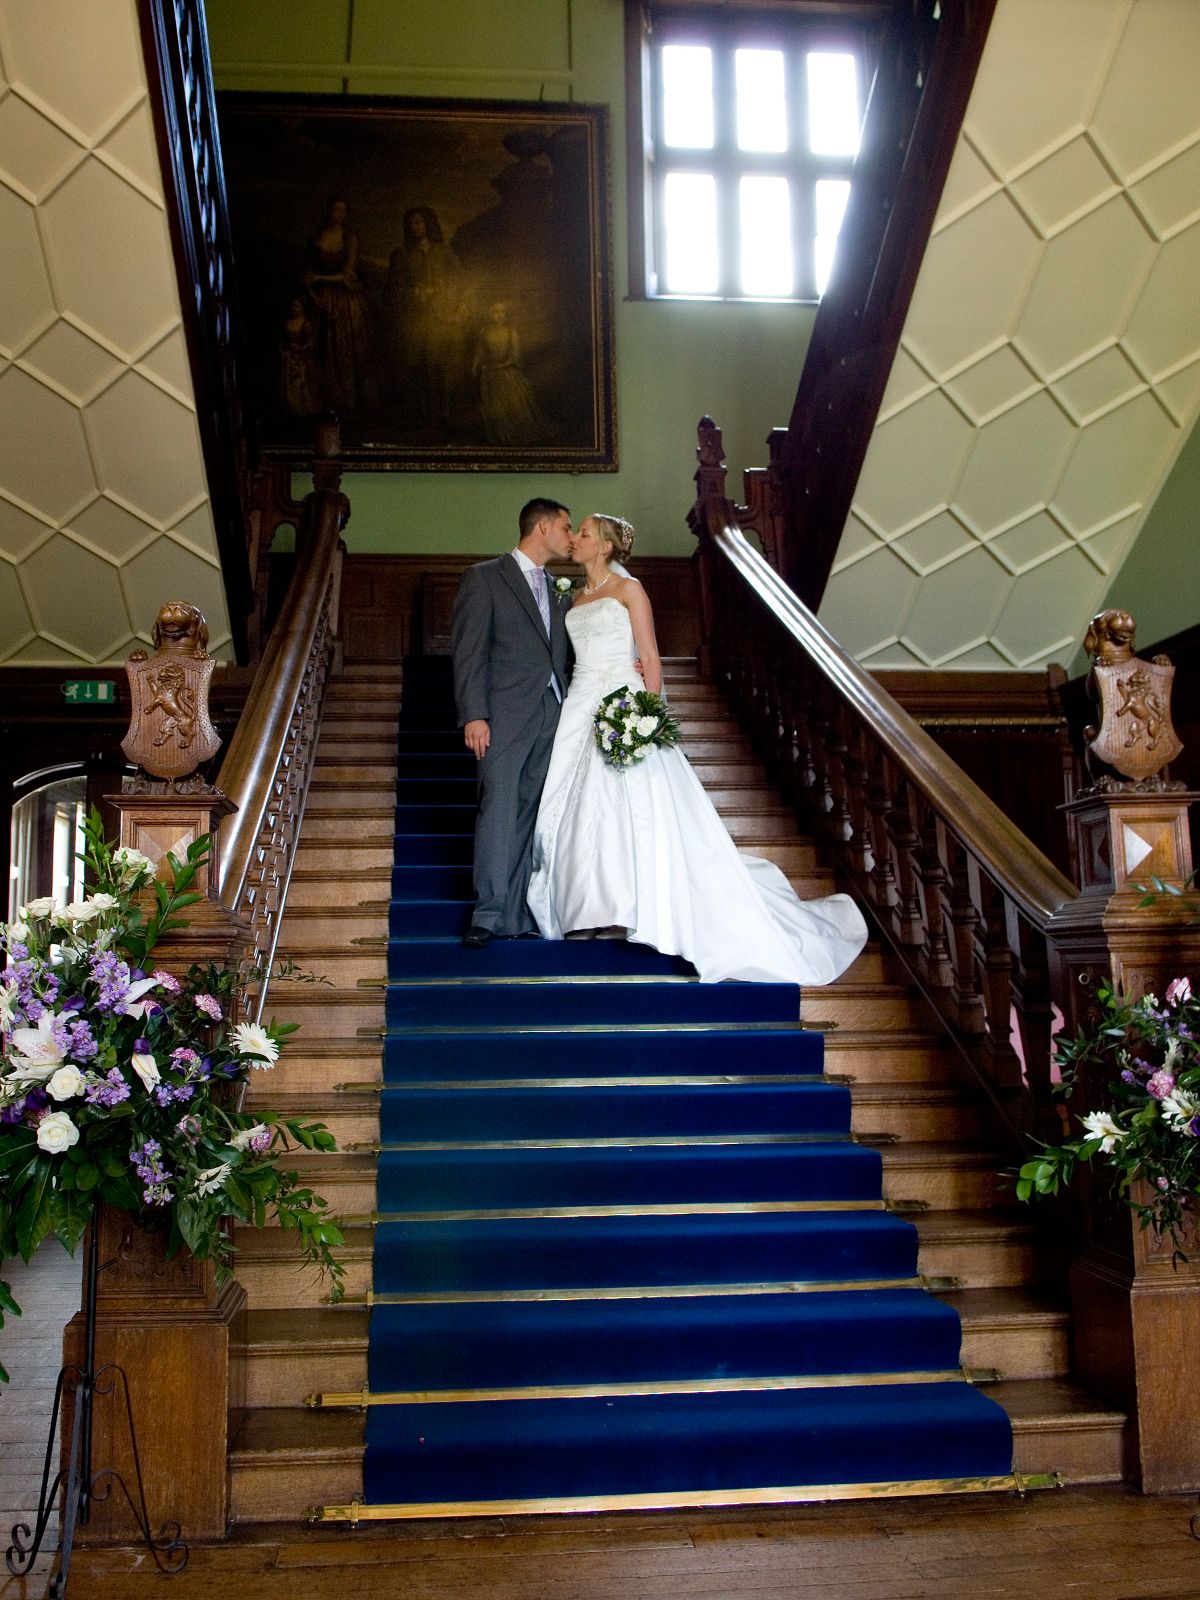 Gallery Item 39 for Ingestre Hall